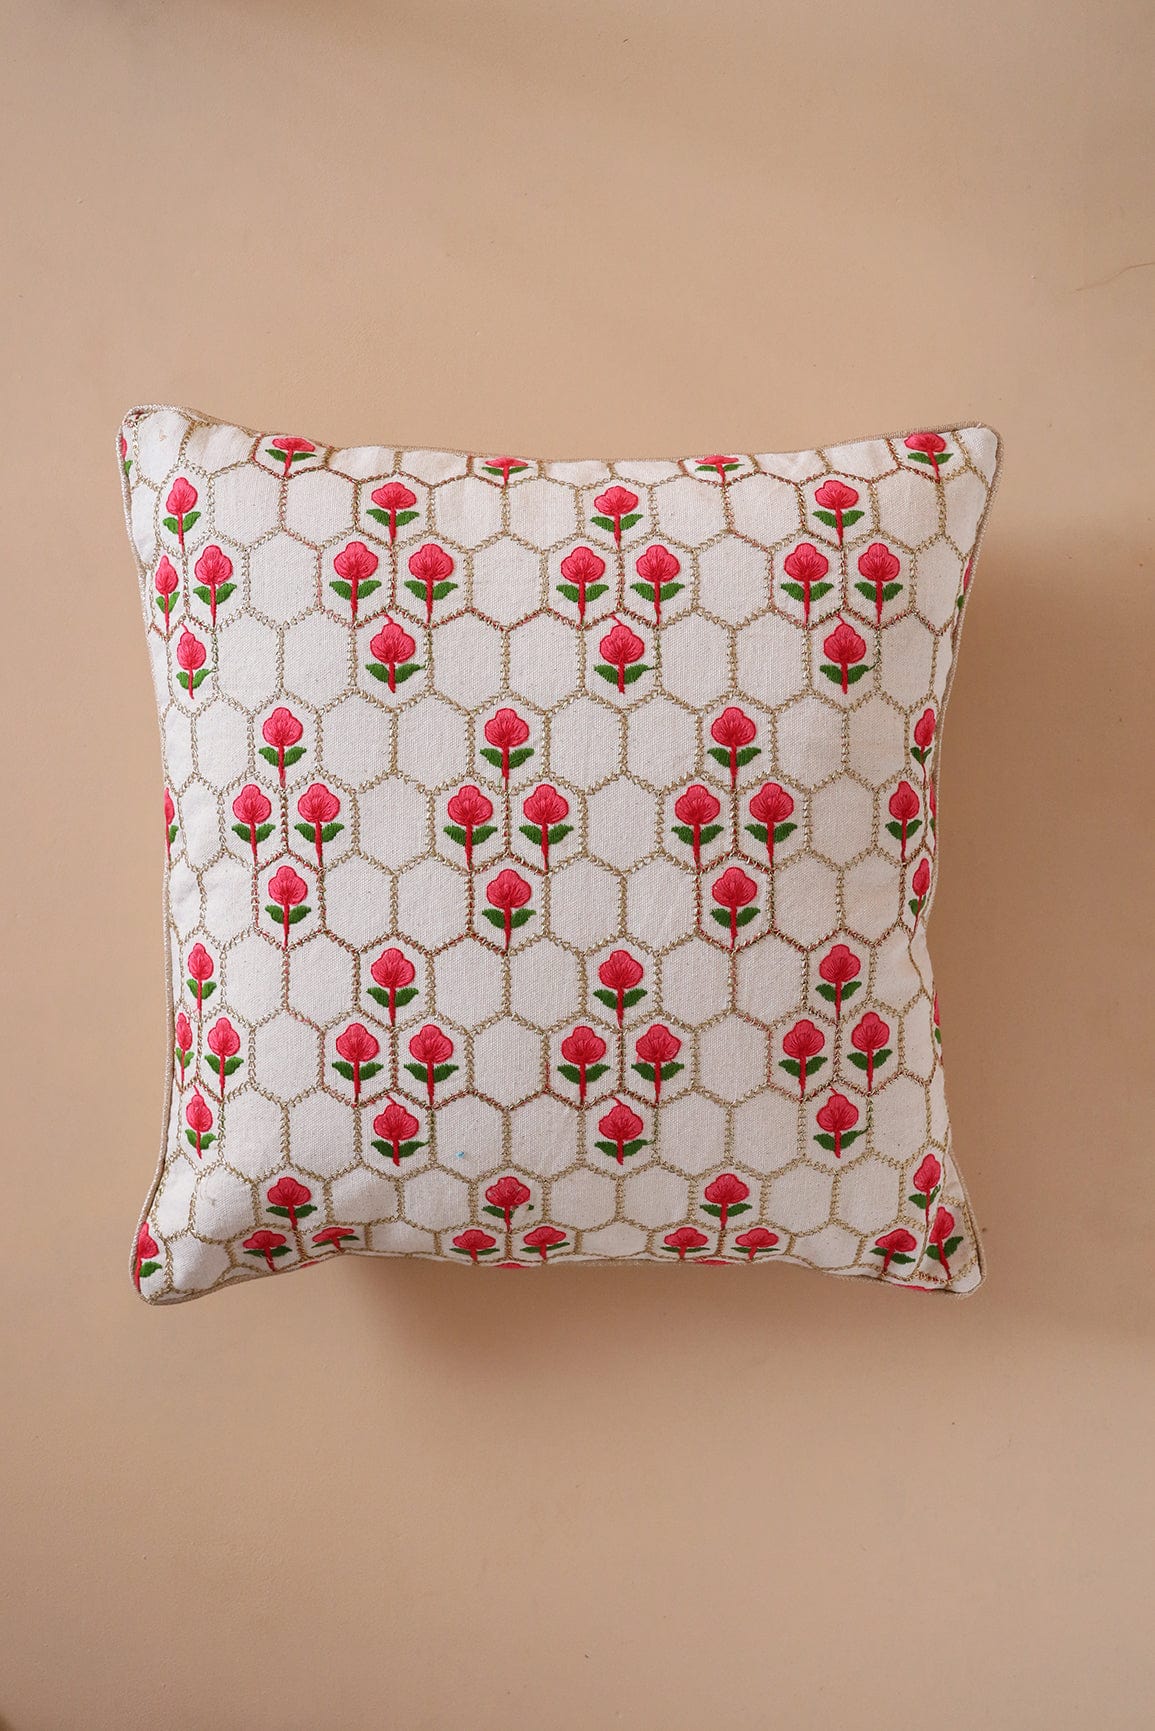 doeraa Floral Embroidery on off white cotton Cushion Cover (16*16 inches)